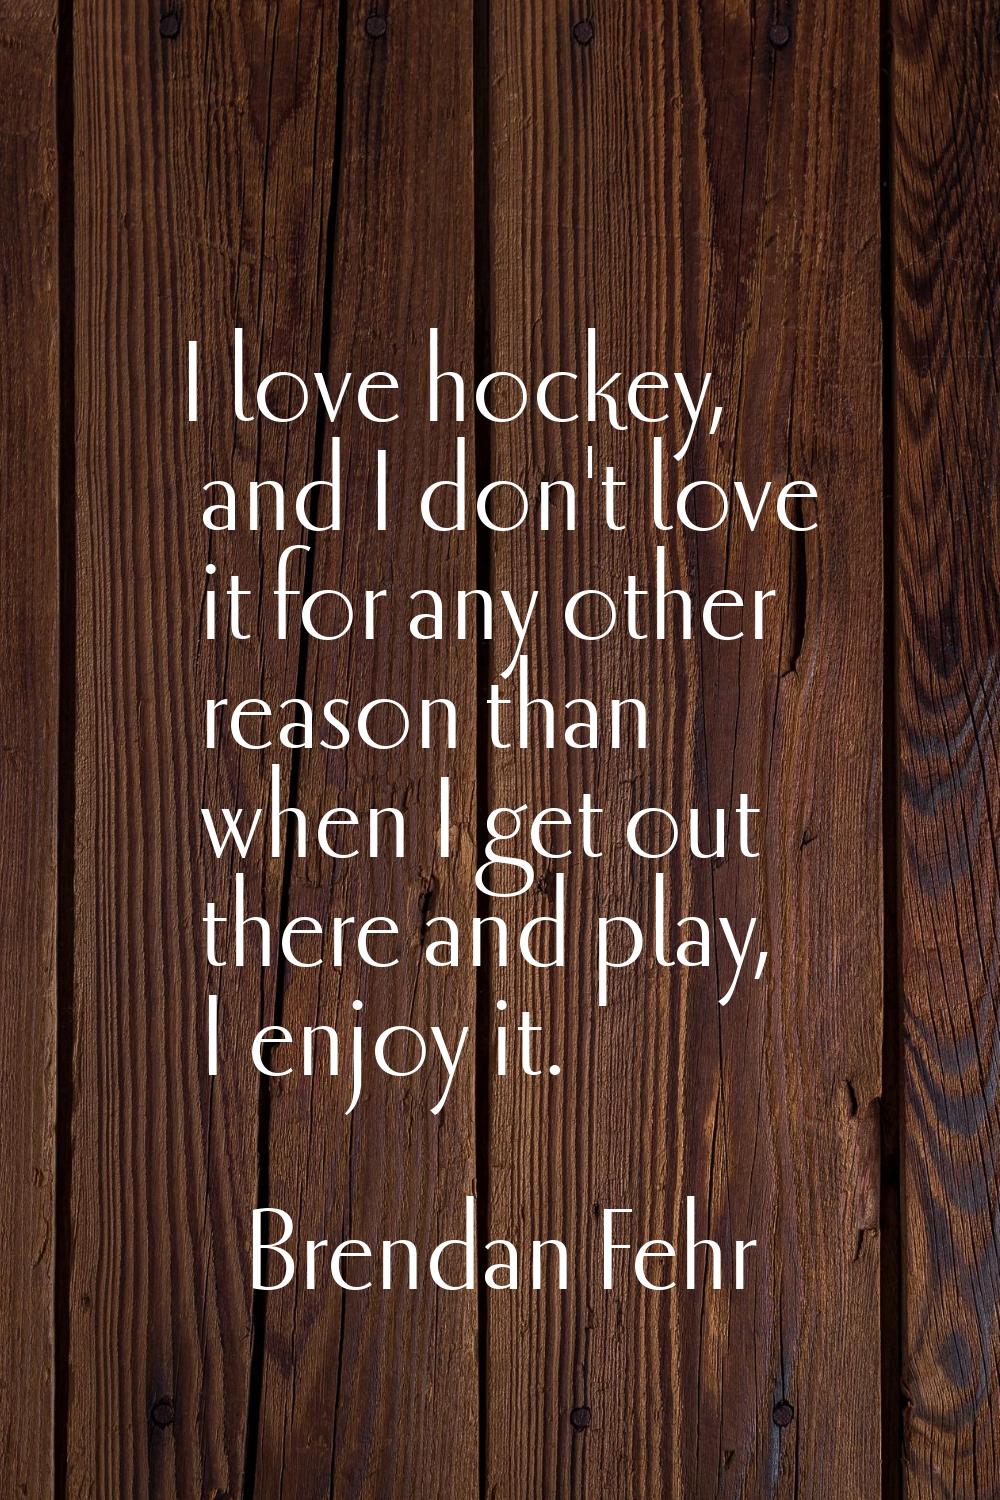 I love hockey, and I don't love it for any other reason than when I get out there and play, I enjoy